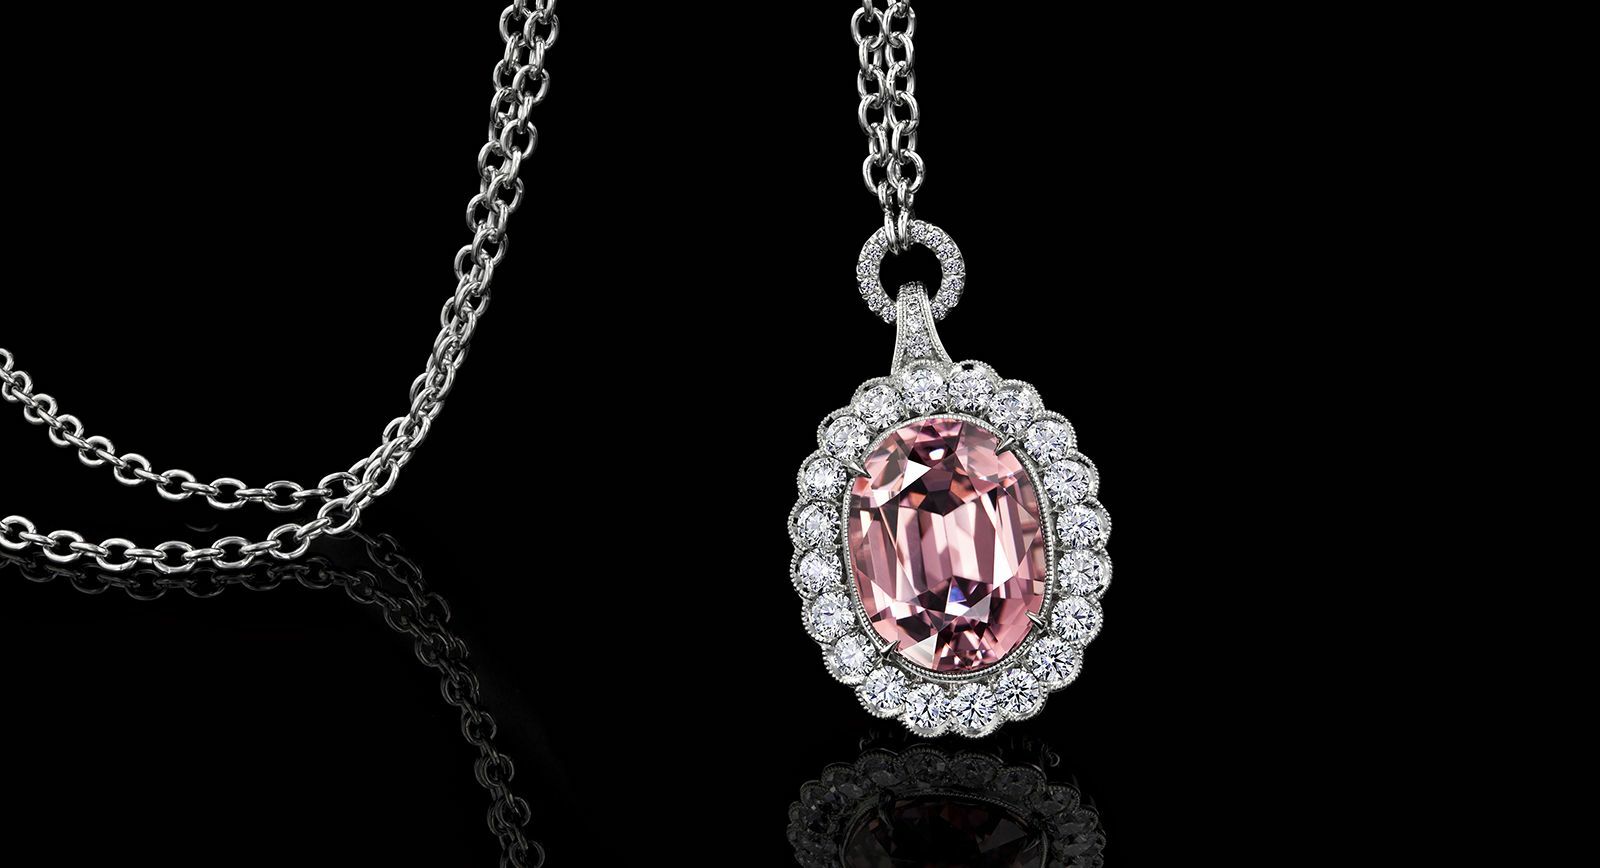 Jeremy Dunn "Lady in Pink" pendant featuring a 4.36-carat oval cut pink garnet from Mahenge, Tanzania, surrounded by a halo of Ideal cut diamonds